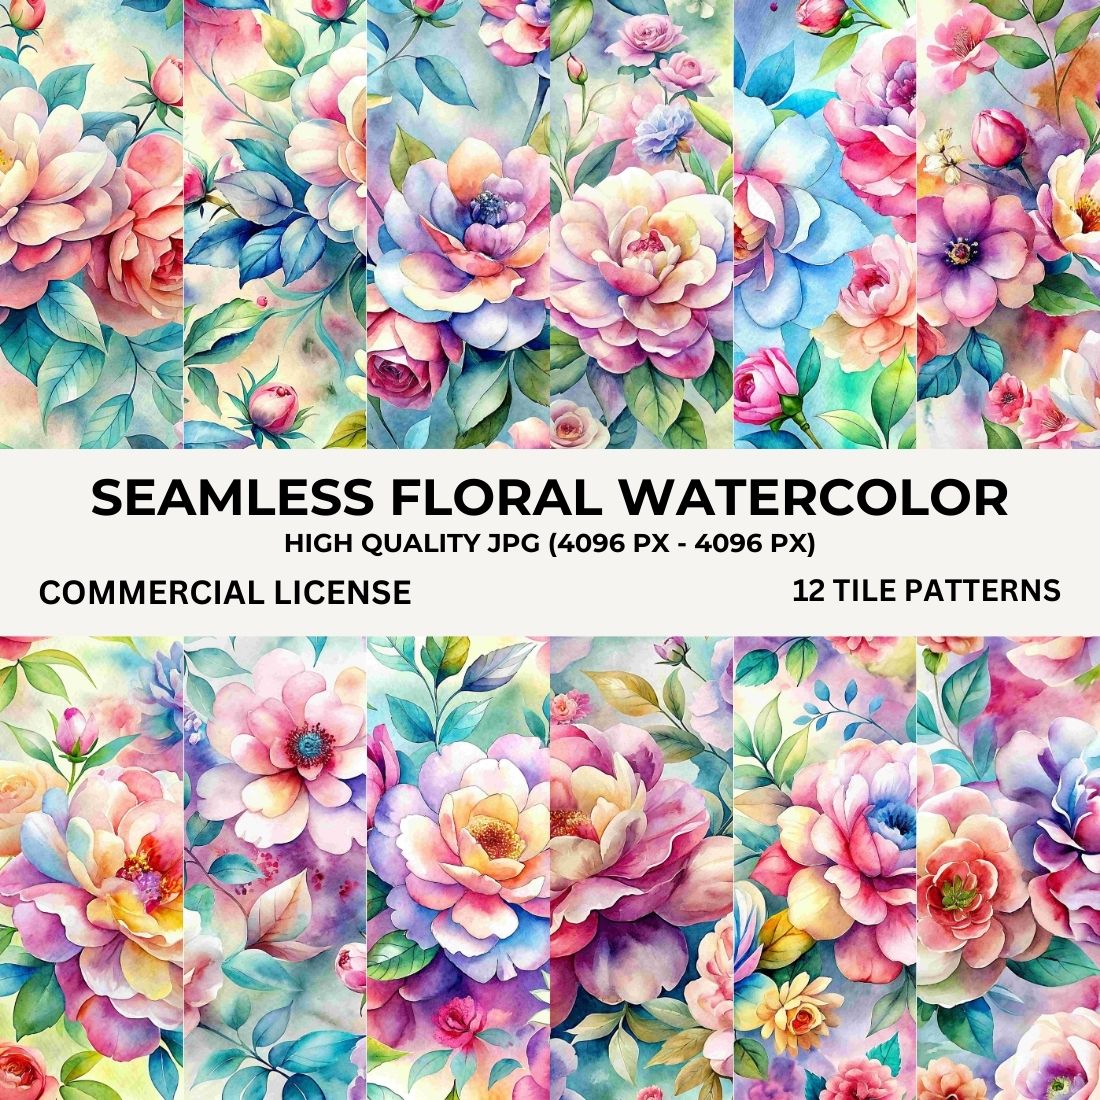 Seamless Floral Watercolor Pattern Bundle: Vibrant Designs for Creative Projects cover image.